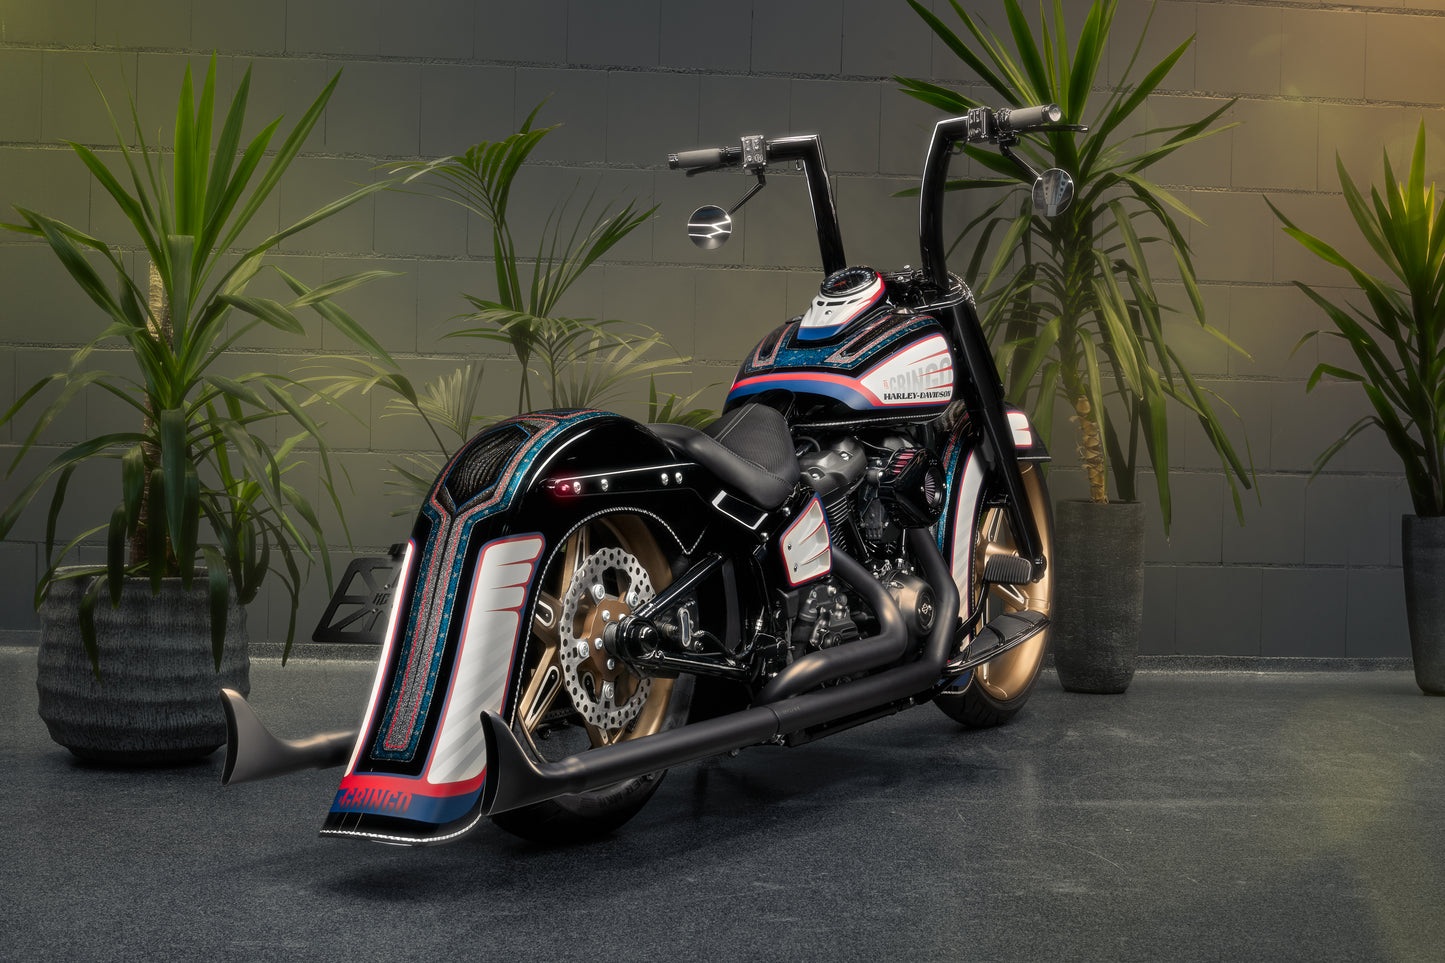 Harley Davidson motorcycle with Killer Custom rear fender from the rear in an industrial environment